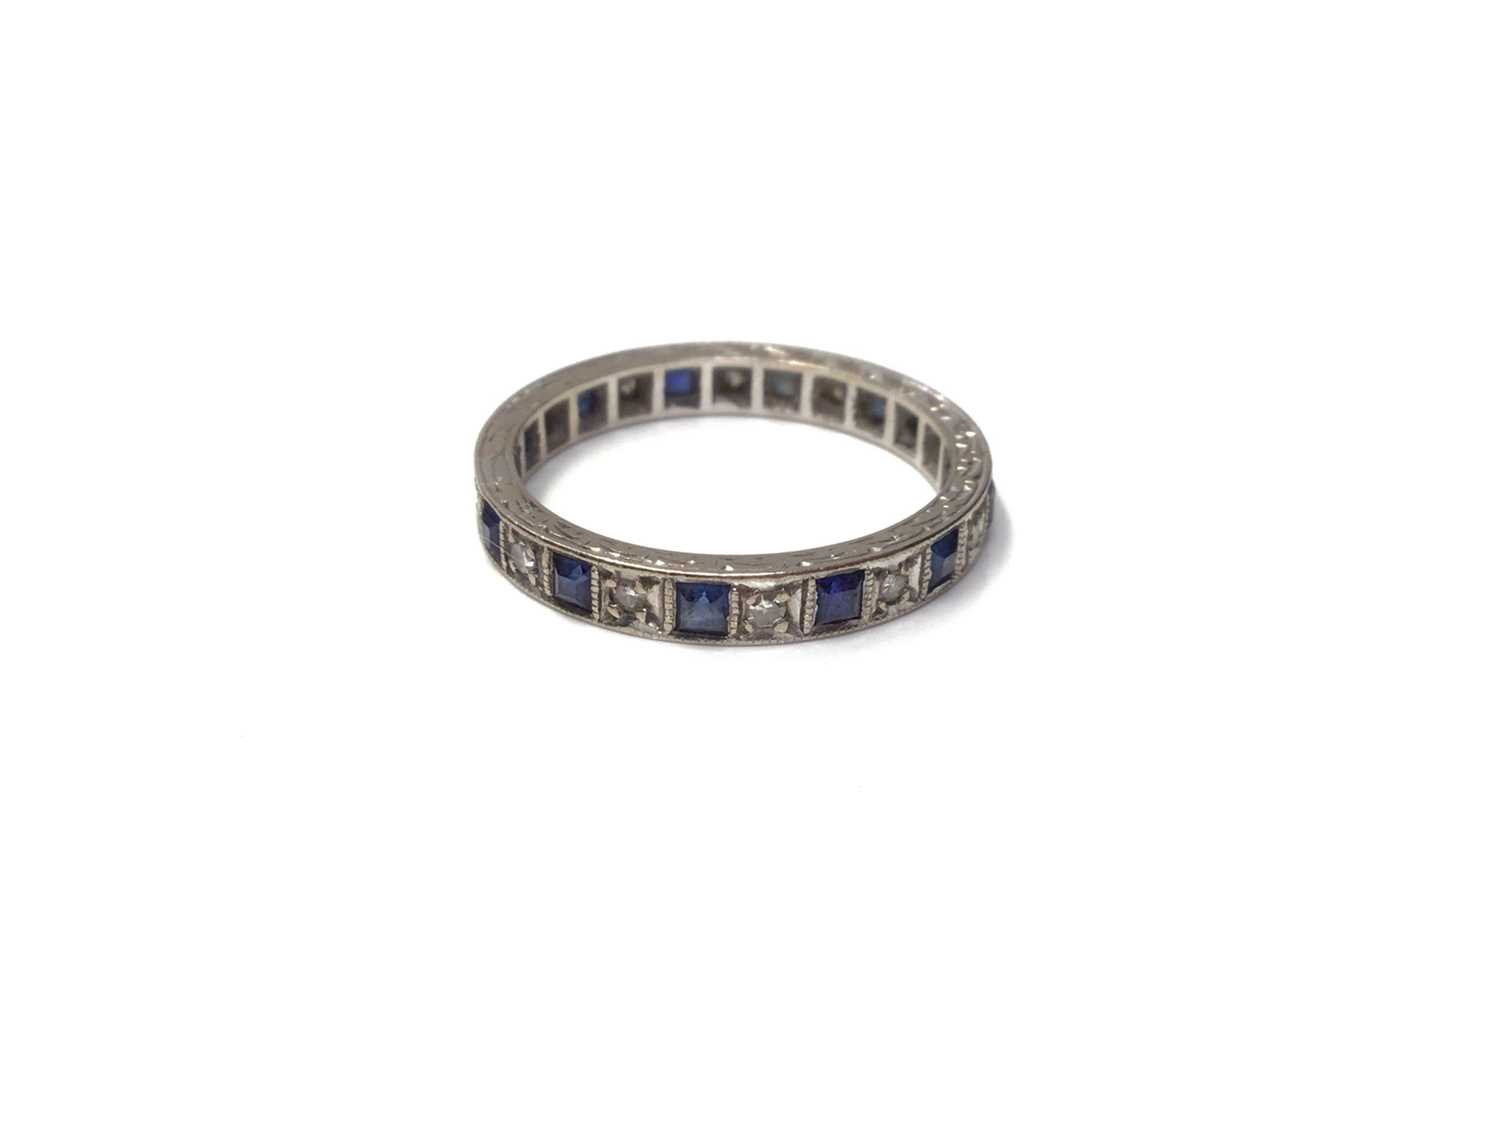 Lot 46 - Diamond and synthetic sapphire eternity ring in white gold setting